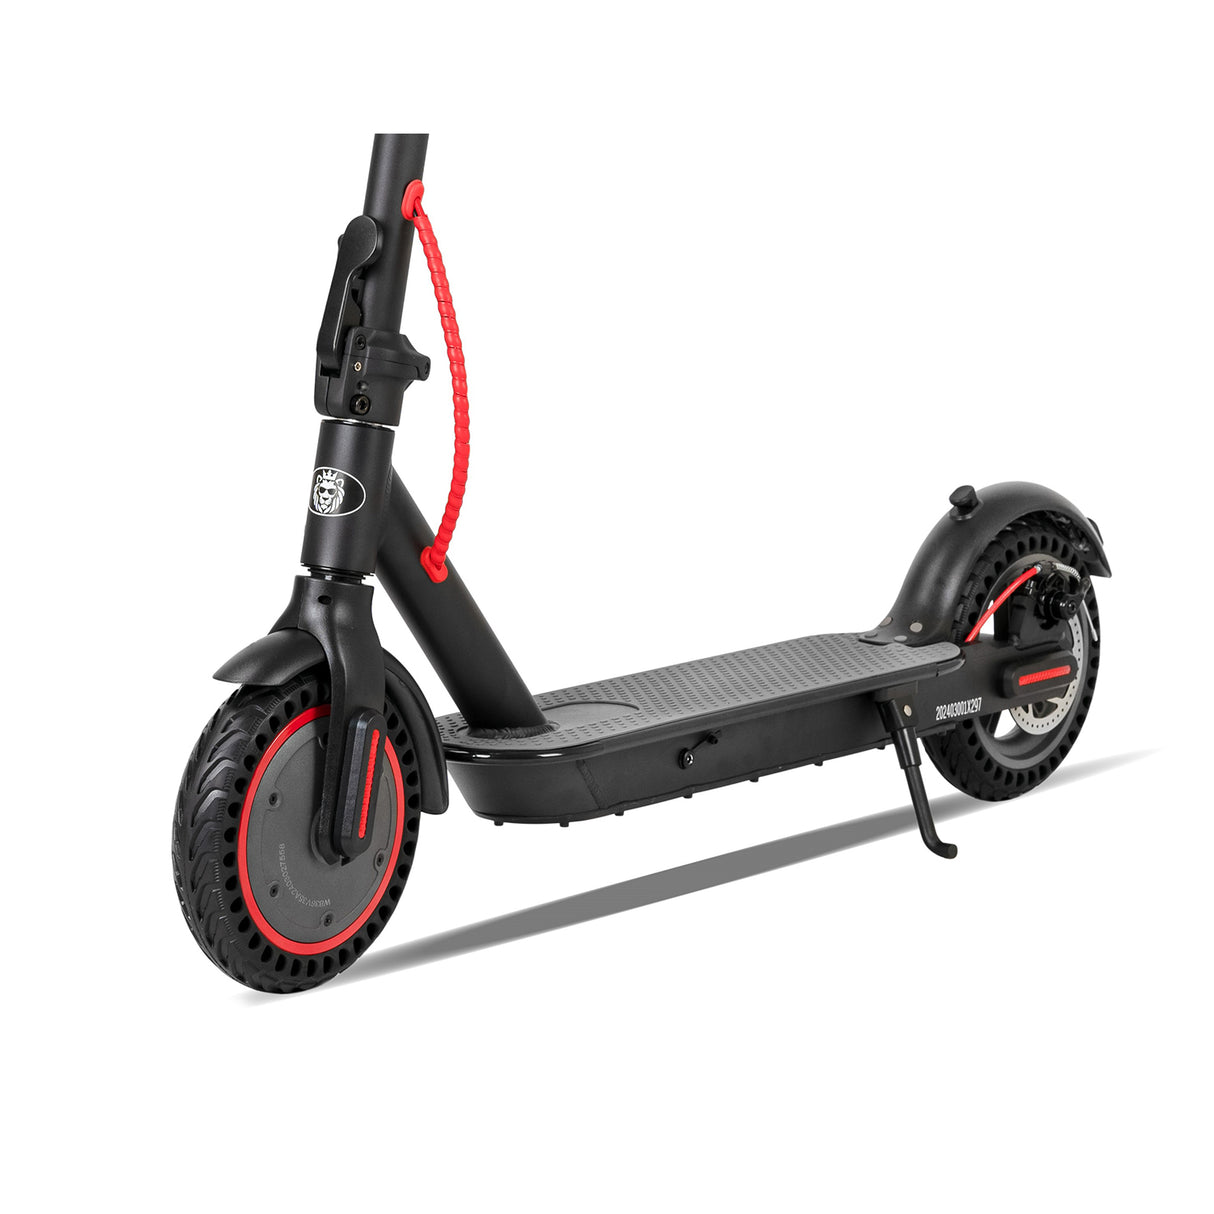 Marshal Sprint S1 Electric Scooter